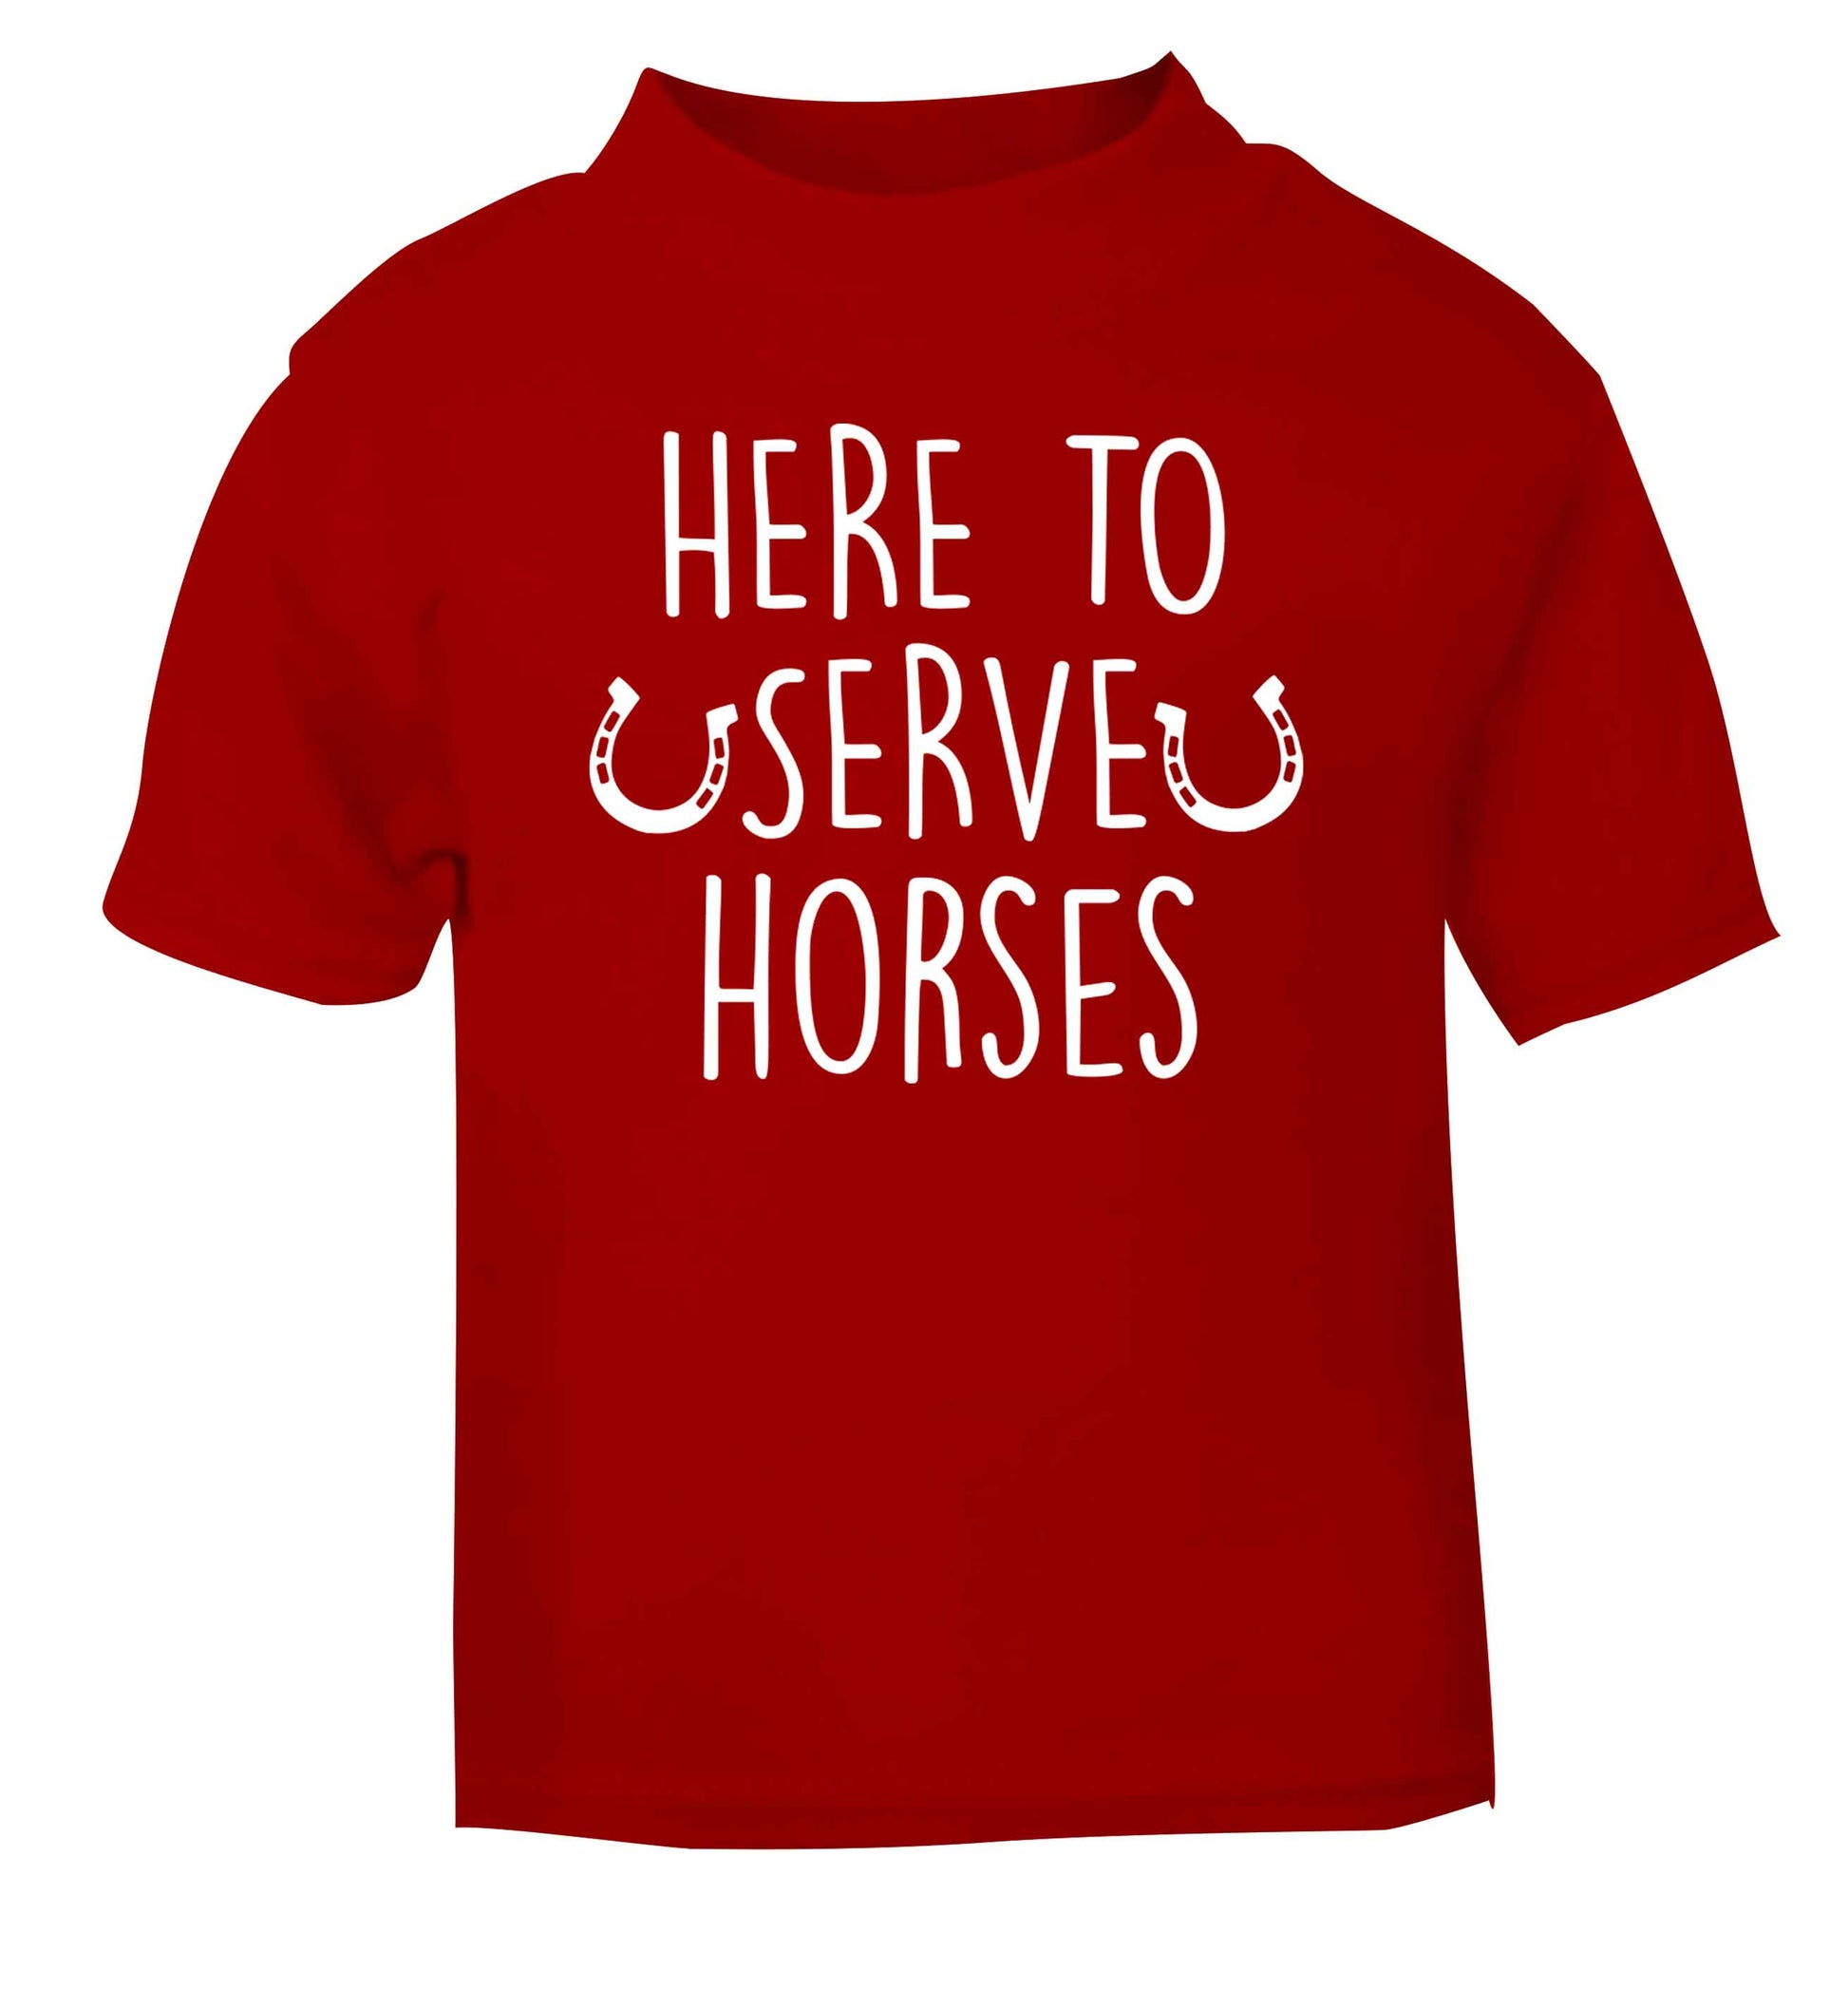 Here to serve horses red baby toddler Tshirt 2 Years